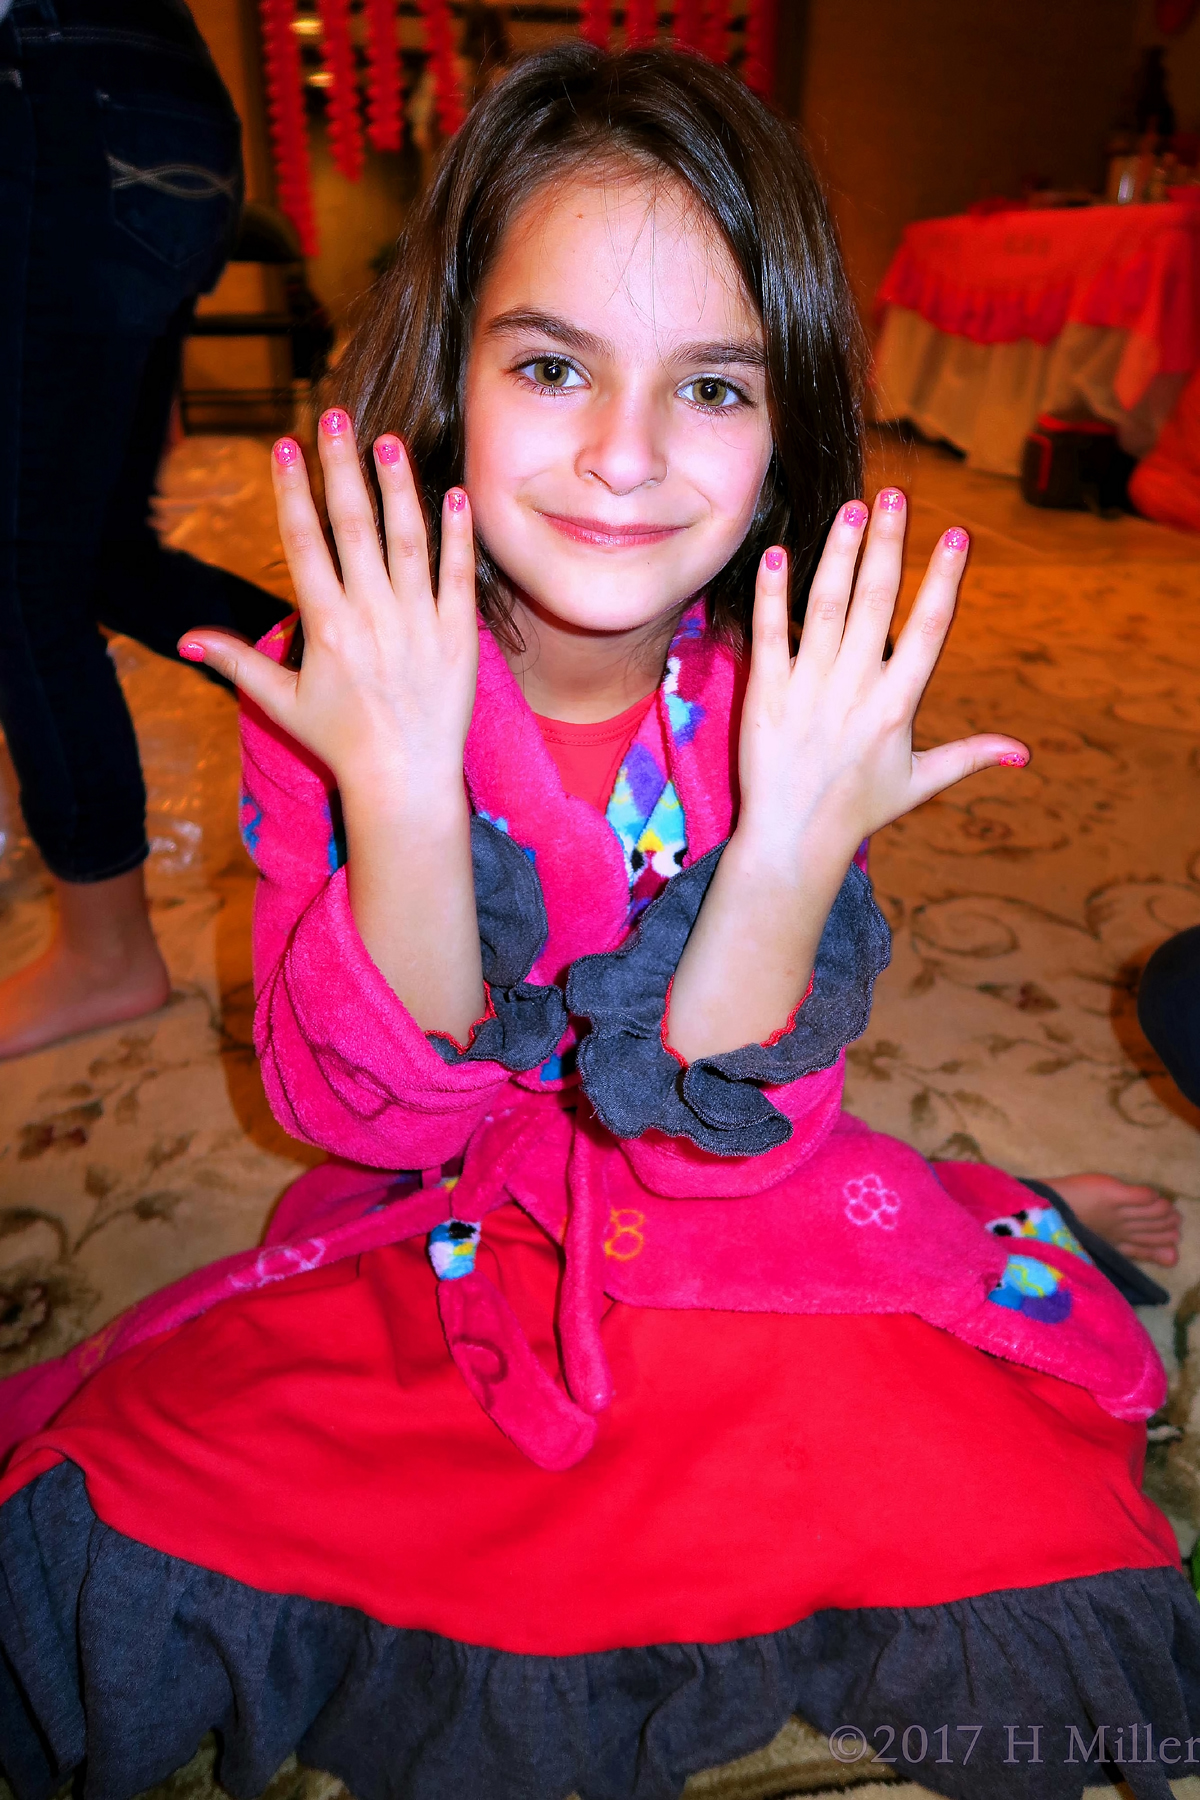 Smiling With Her Pink And Glitter Kids Manicure. 